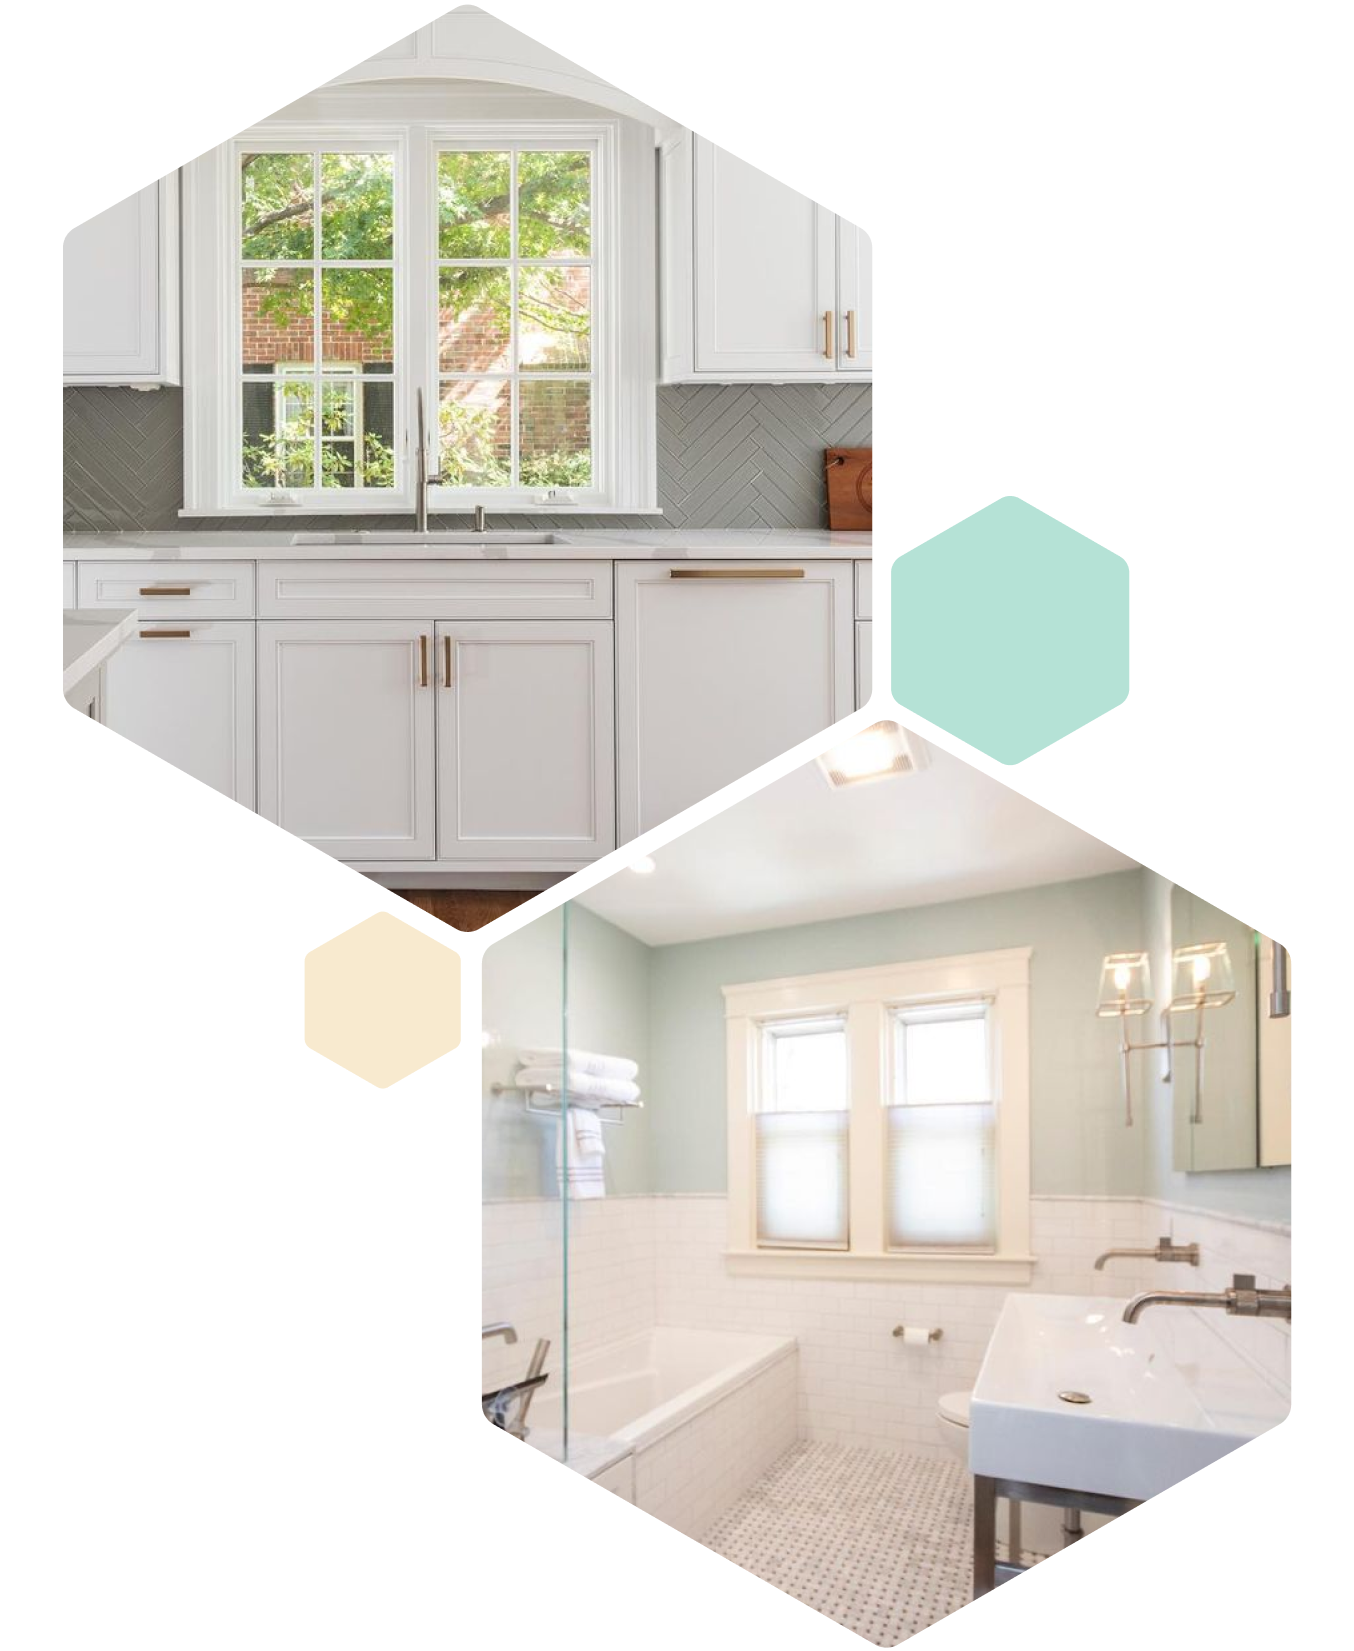 images in hexagon shapes of a kitchen and bathroom